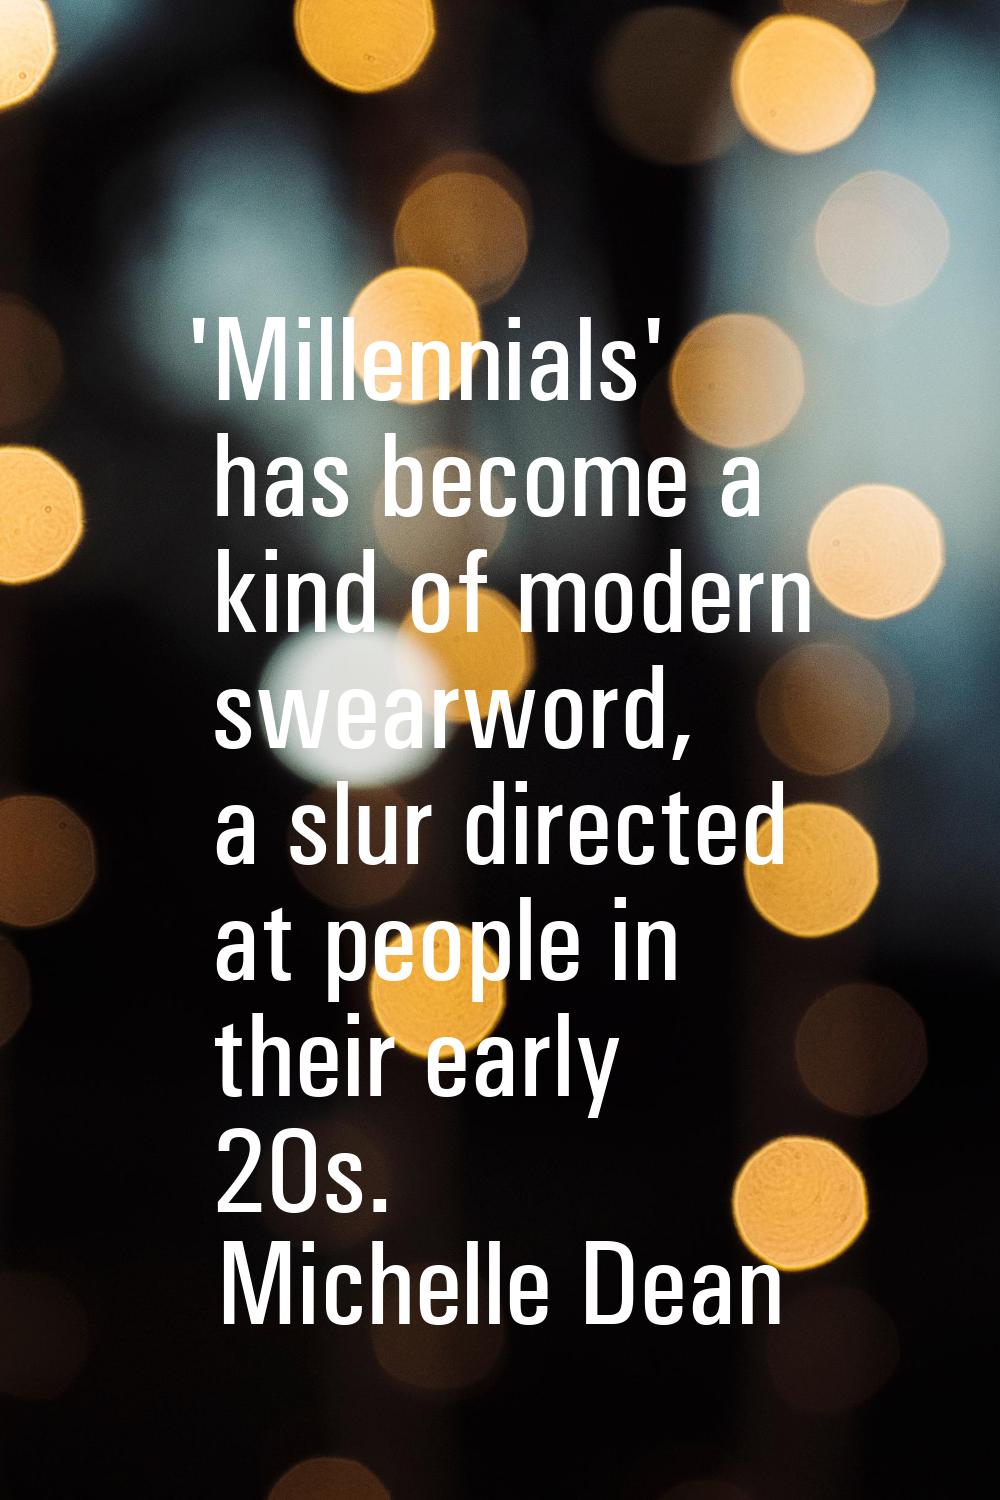 'Millennials' has become a kind of modern swearword, a slur directed at people in their early 20s.